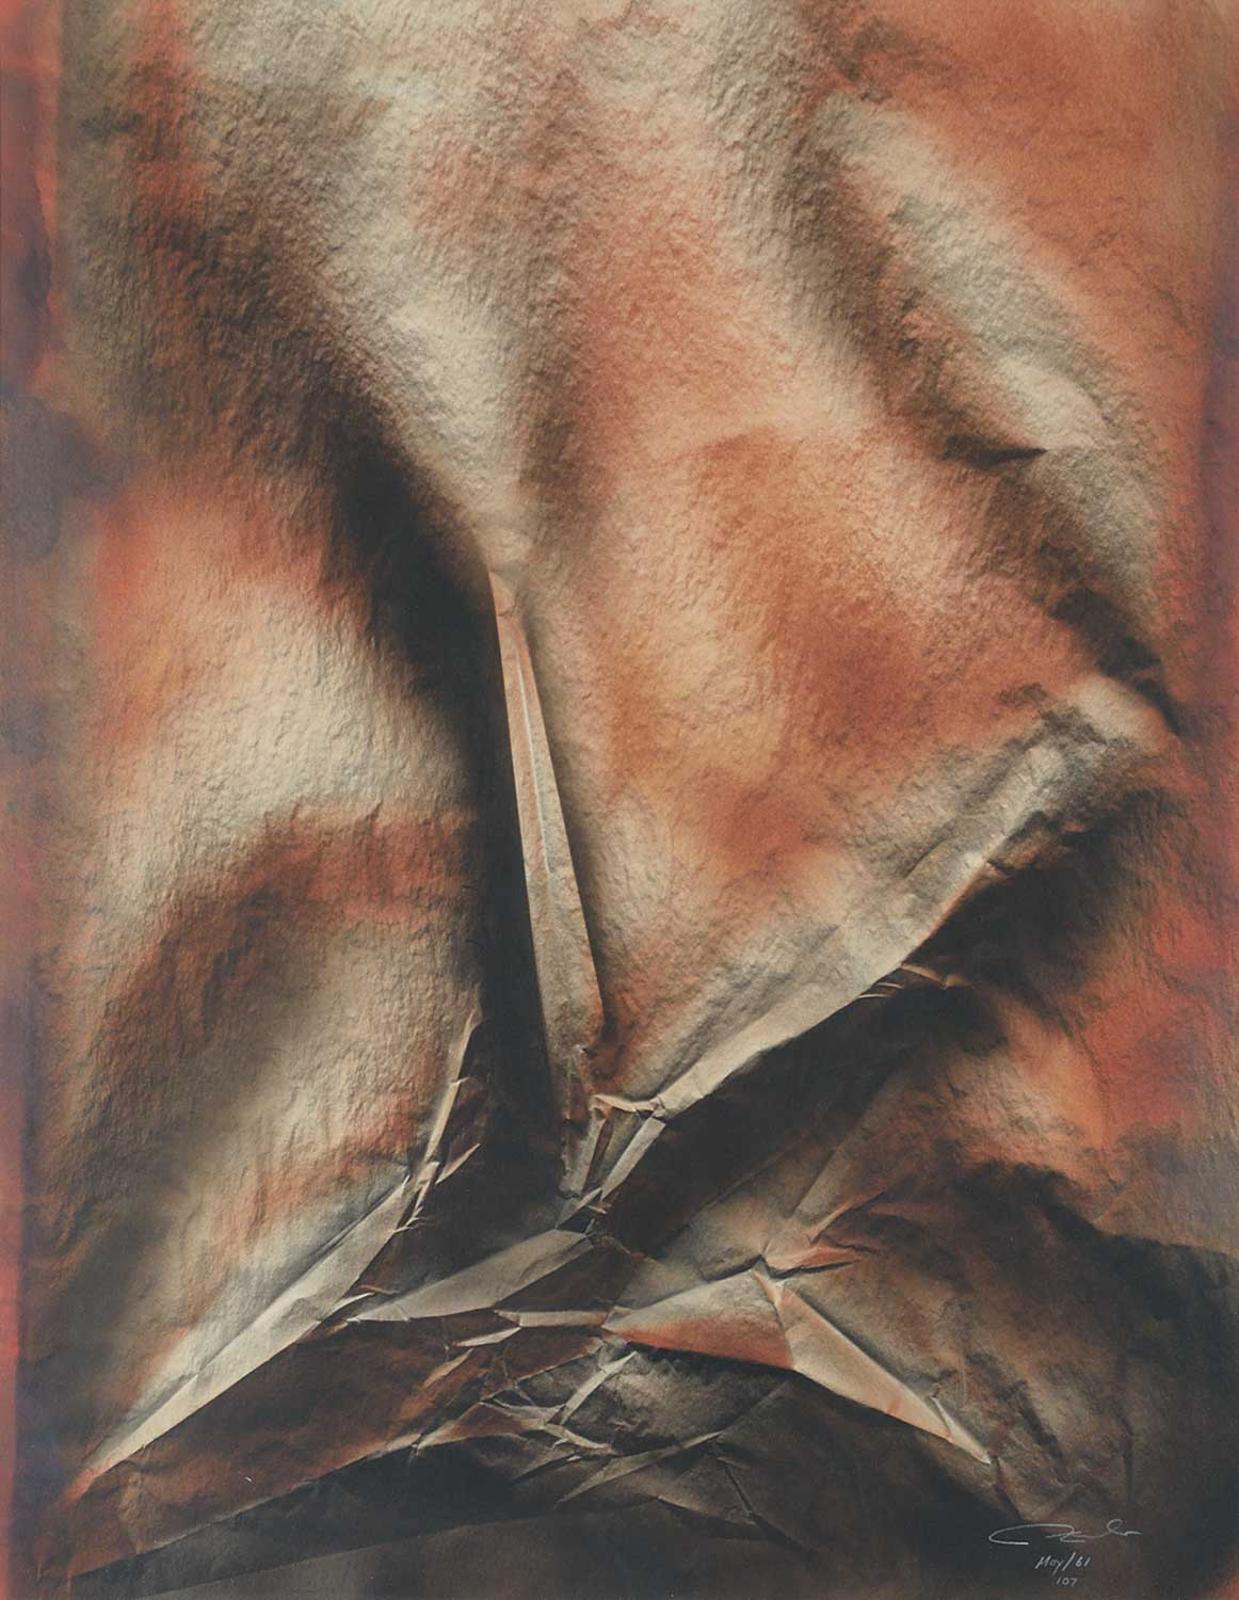 A. Laslo - Untitled - Abstract in Brown and Black